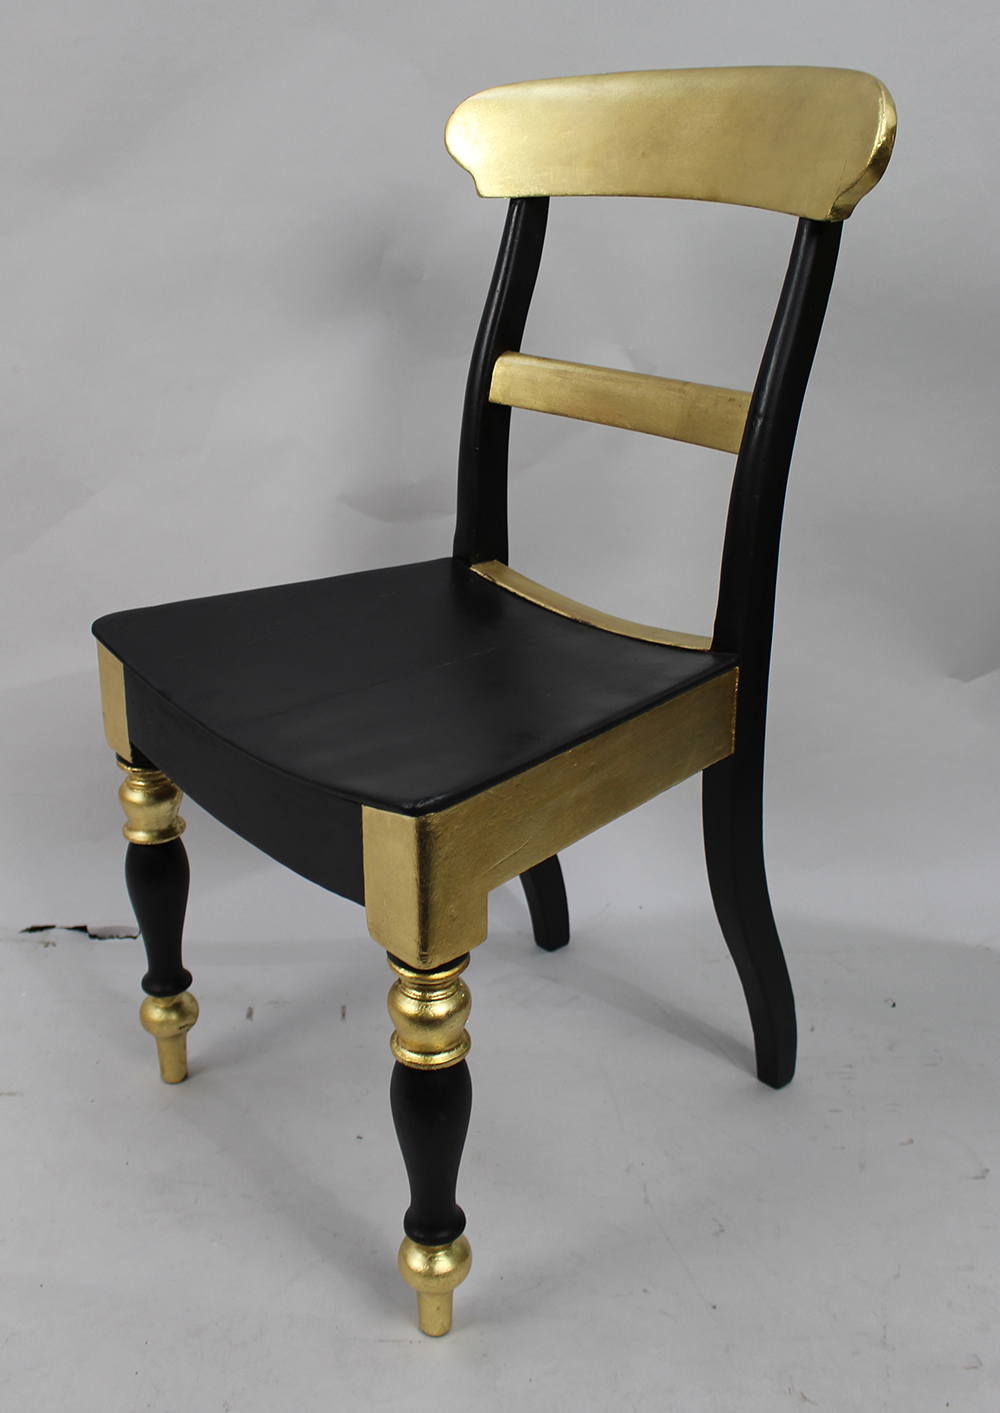 Painted Black & Gilt Desk Occasional Chair - Image 3 of 4